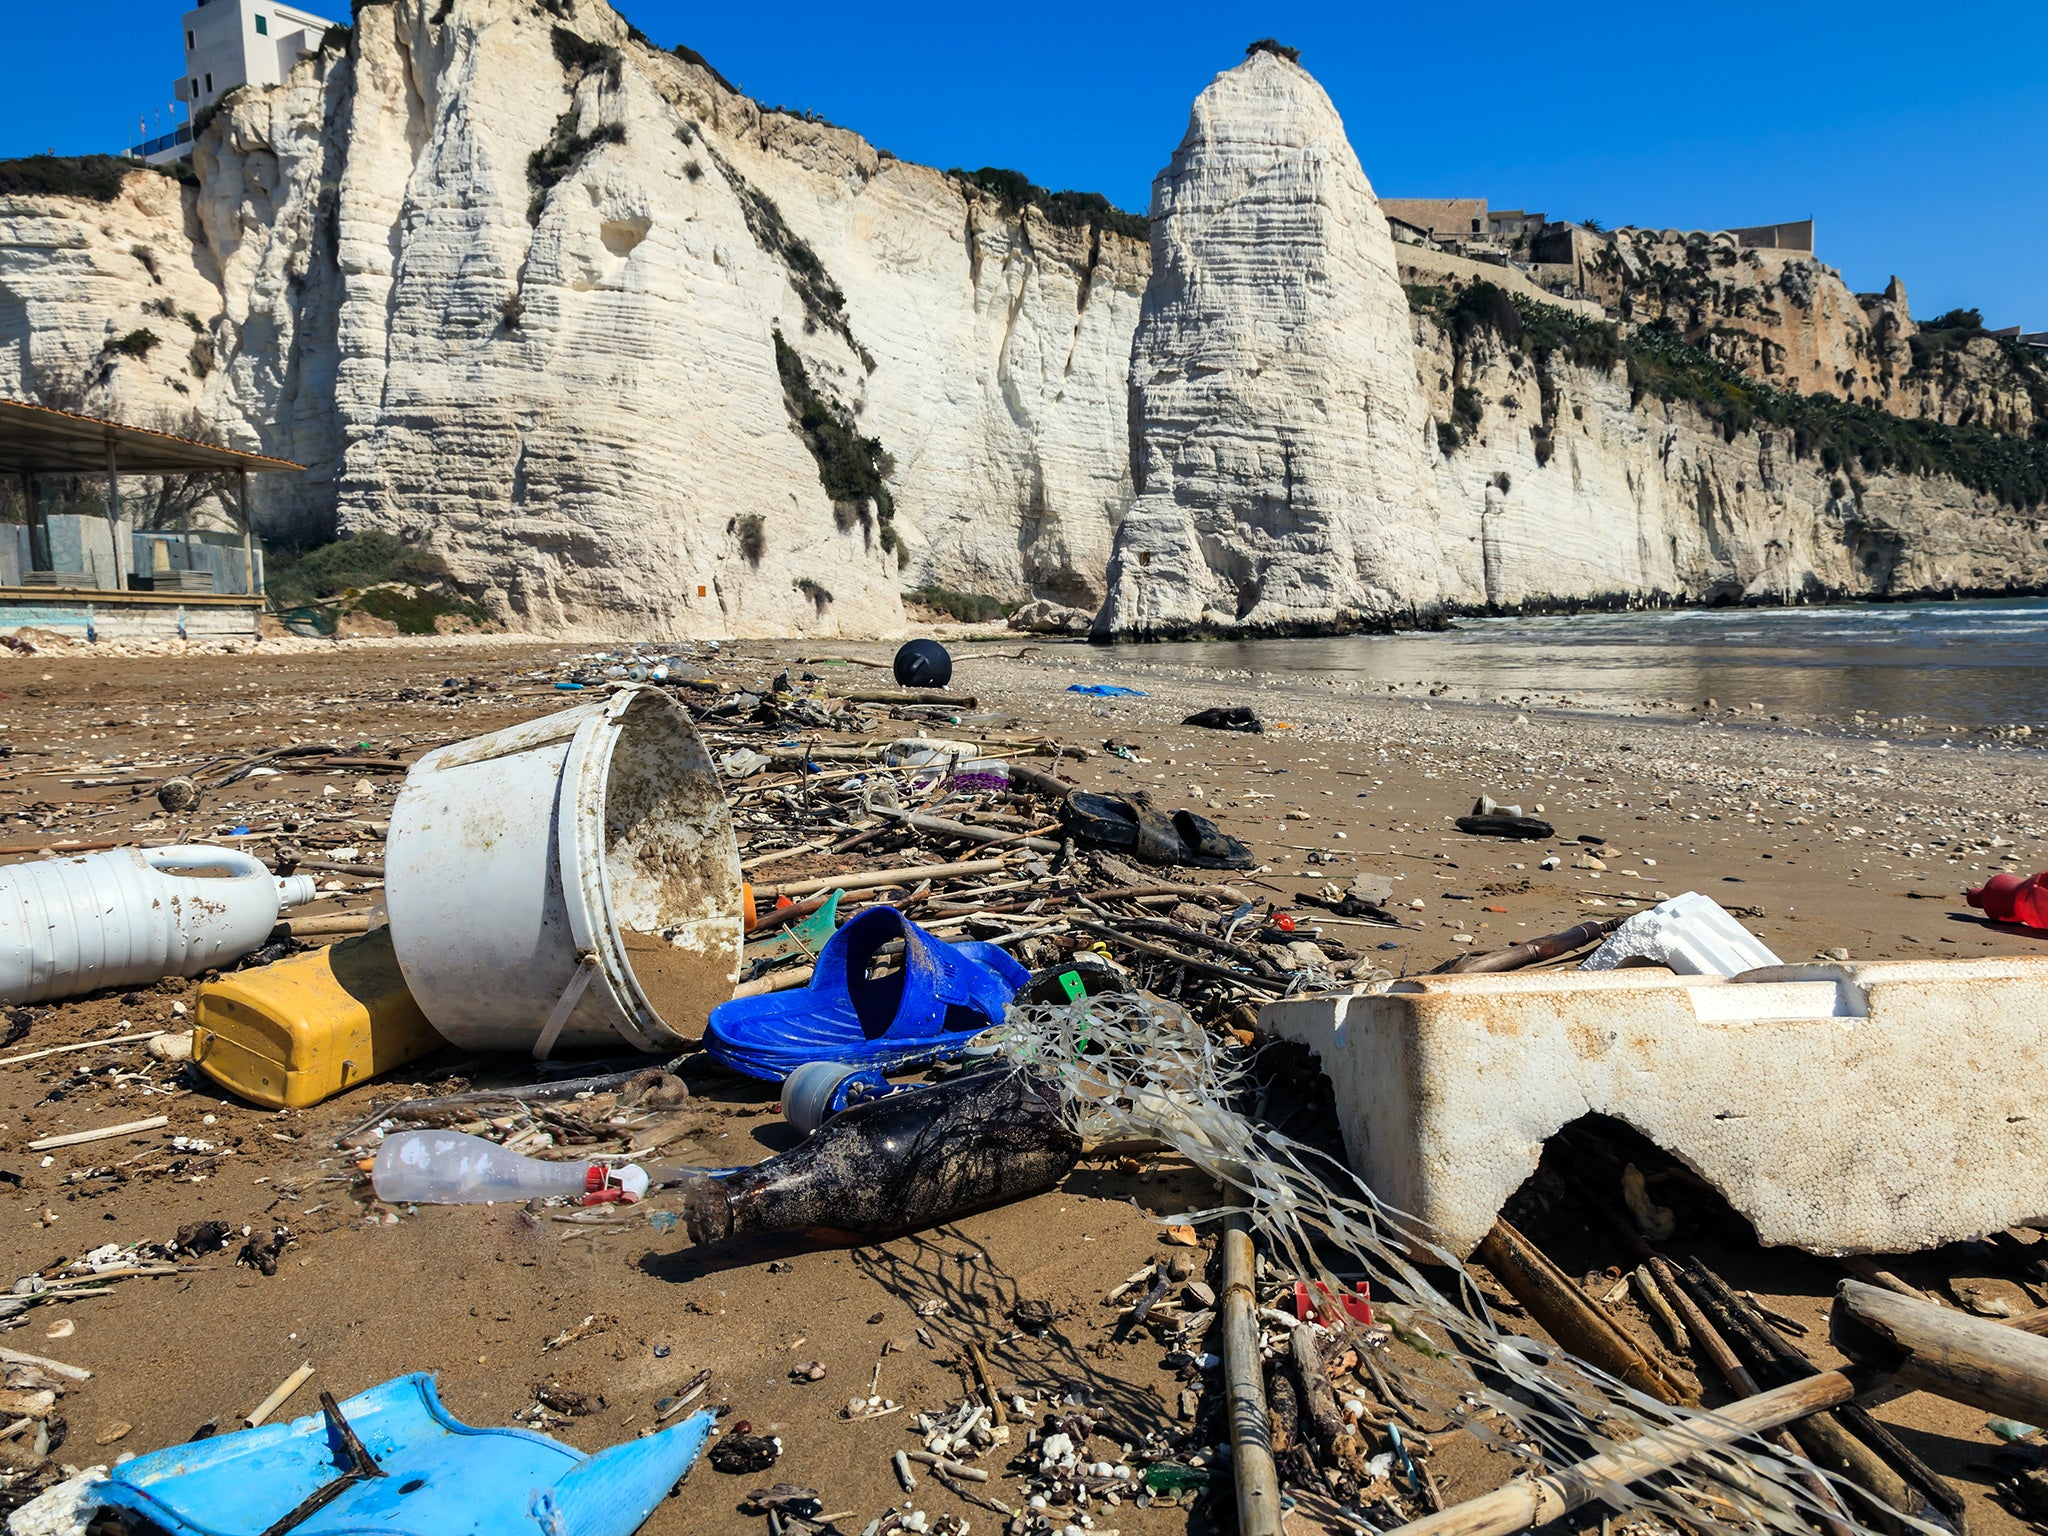 More than 60 per cent of the waste swirling through Mediterranean coastal waters is plastic, the study found.